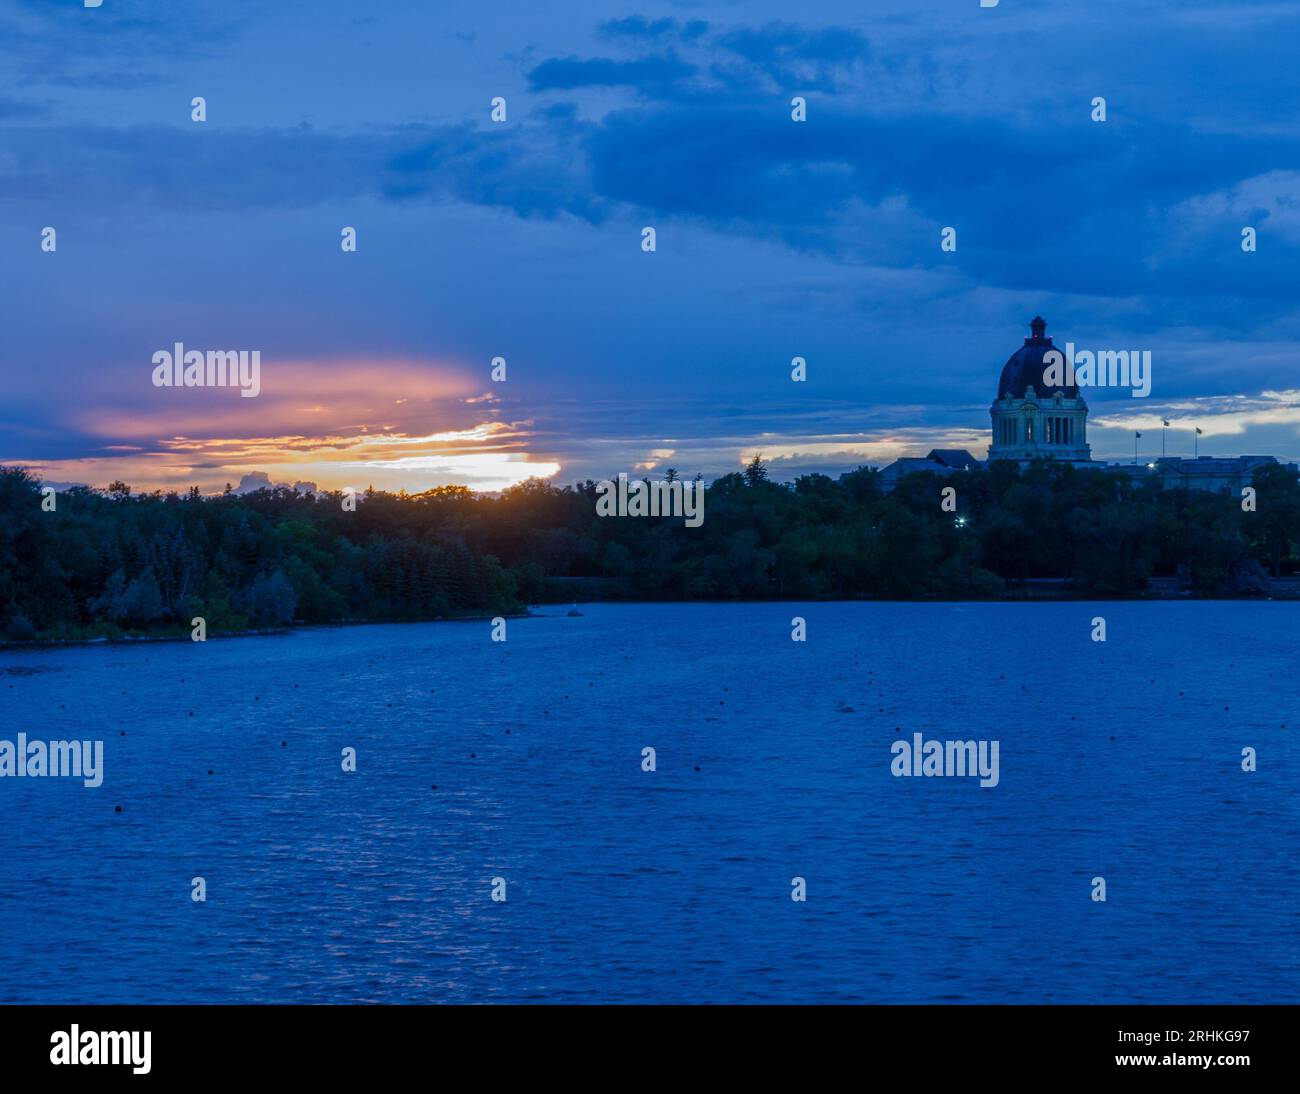 The dome of the Saskatchewan provincial legislative building can be seen with a backdrop of a prairie sunset. Wascana Lake is in the foreground. Stock Photo